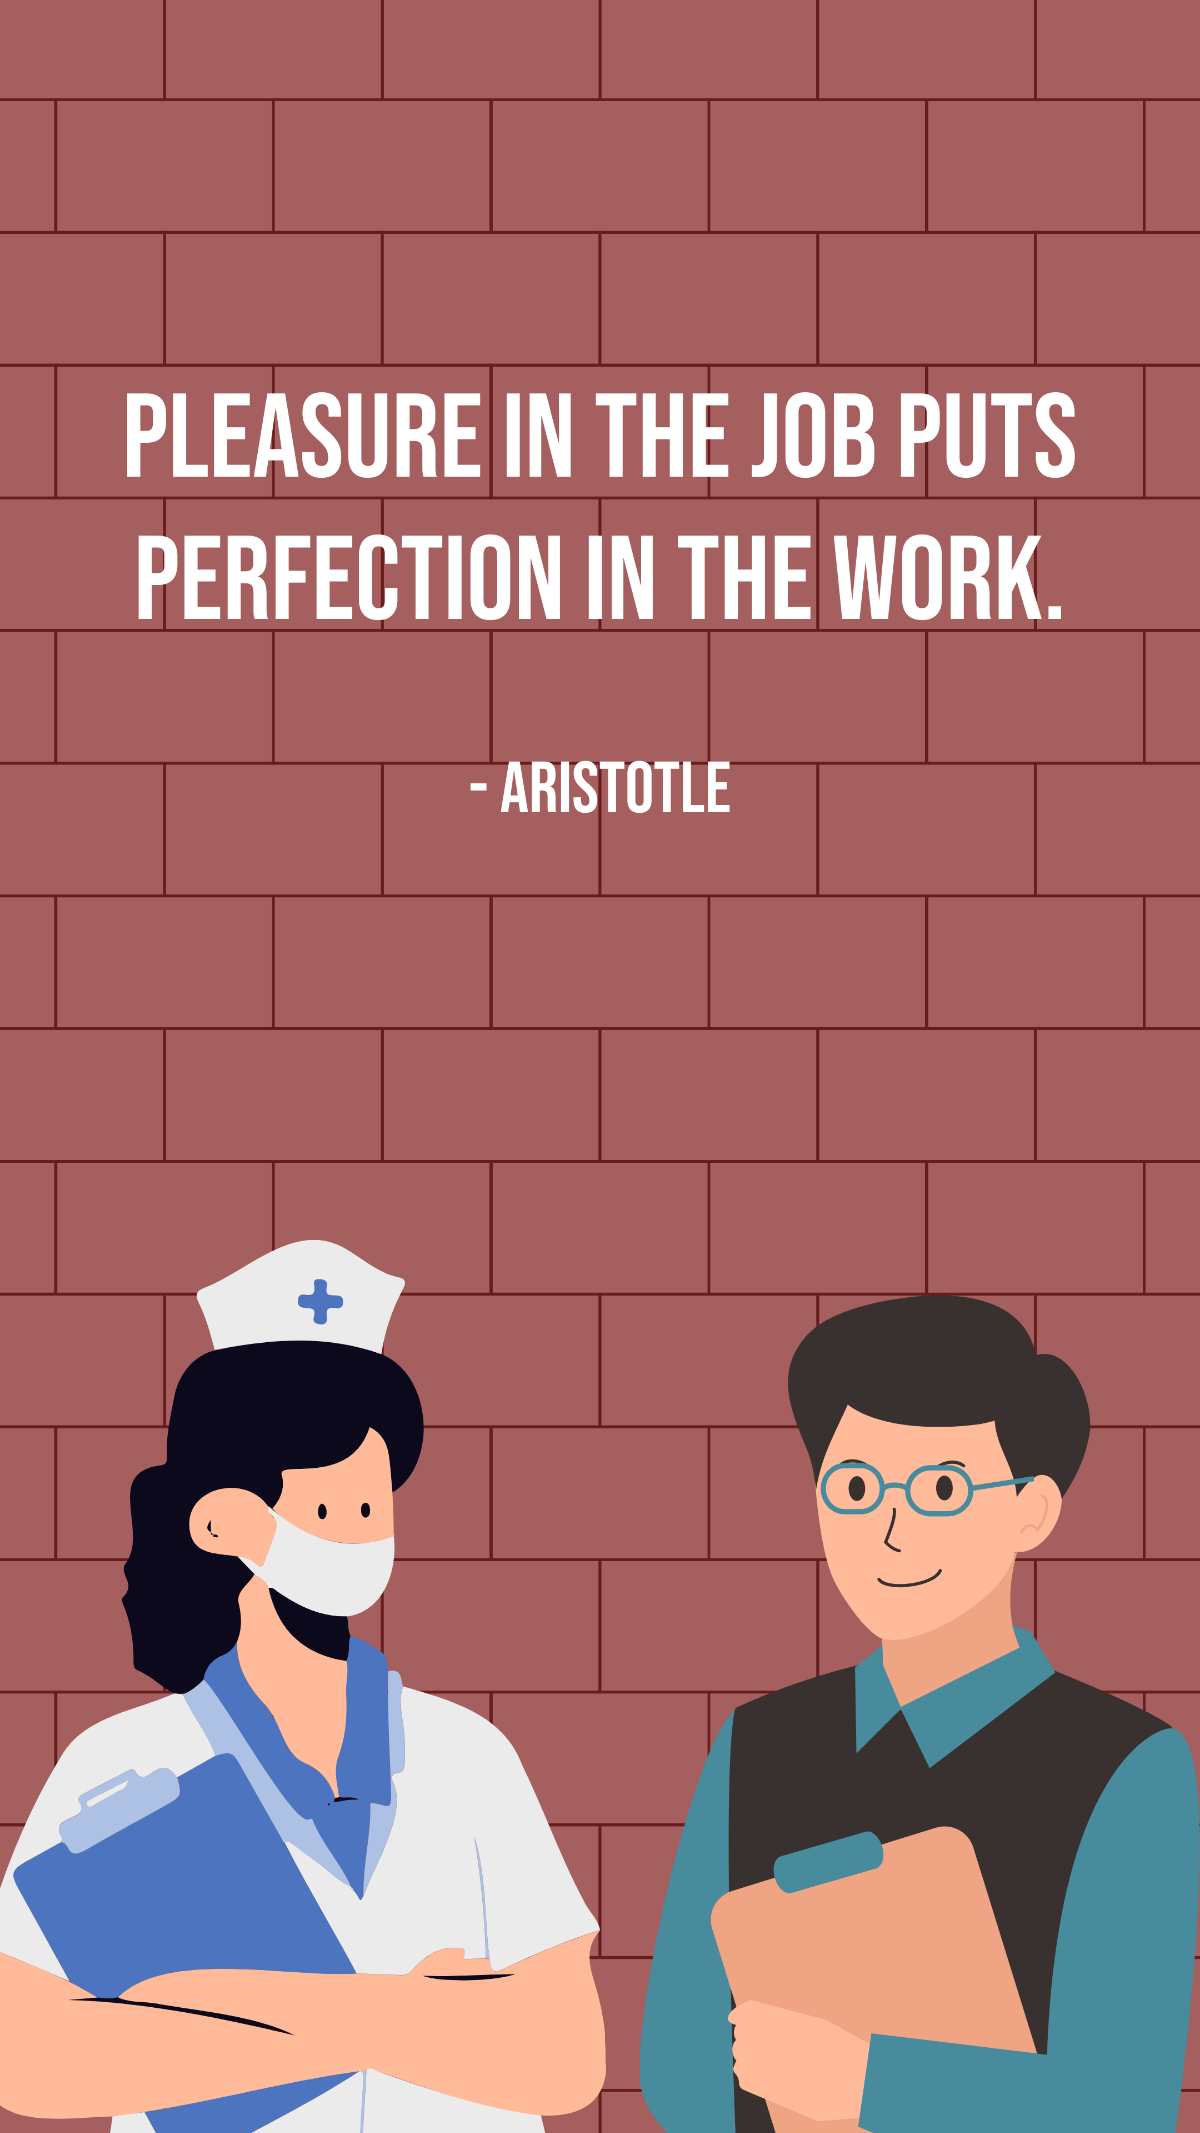 Aristotle - Pleasure in the job puts perfection in the work. Template